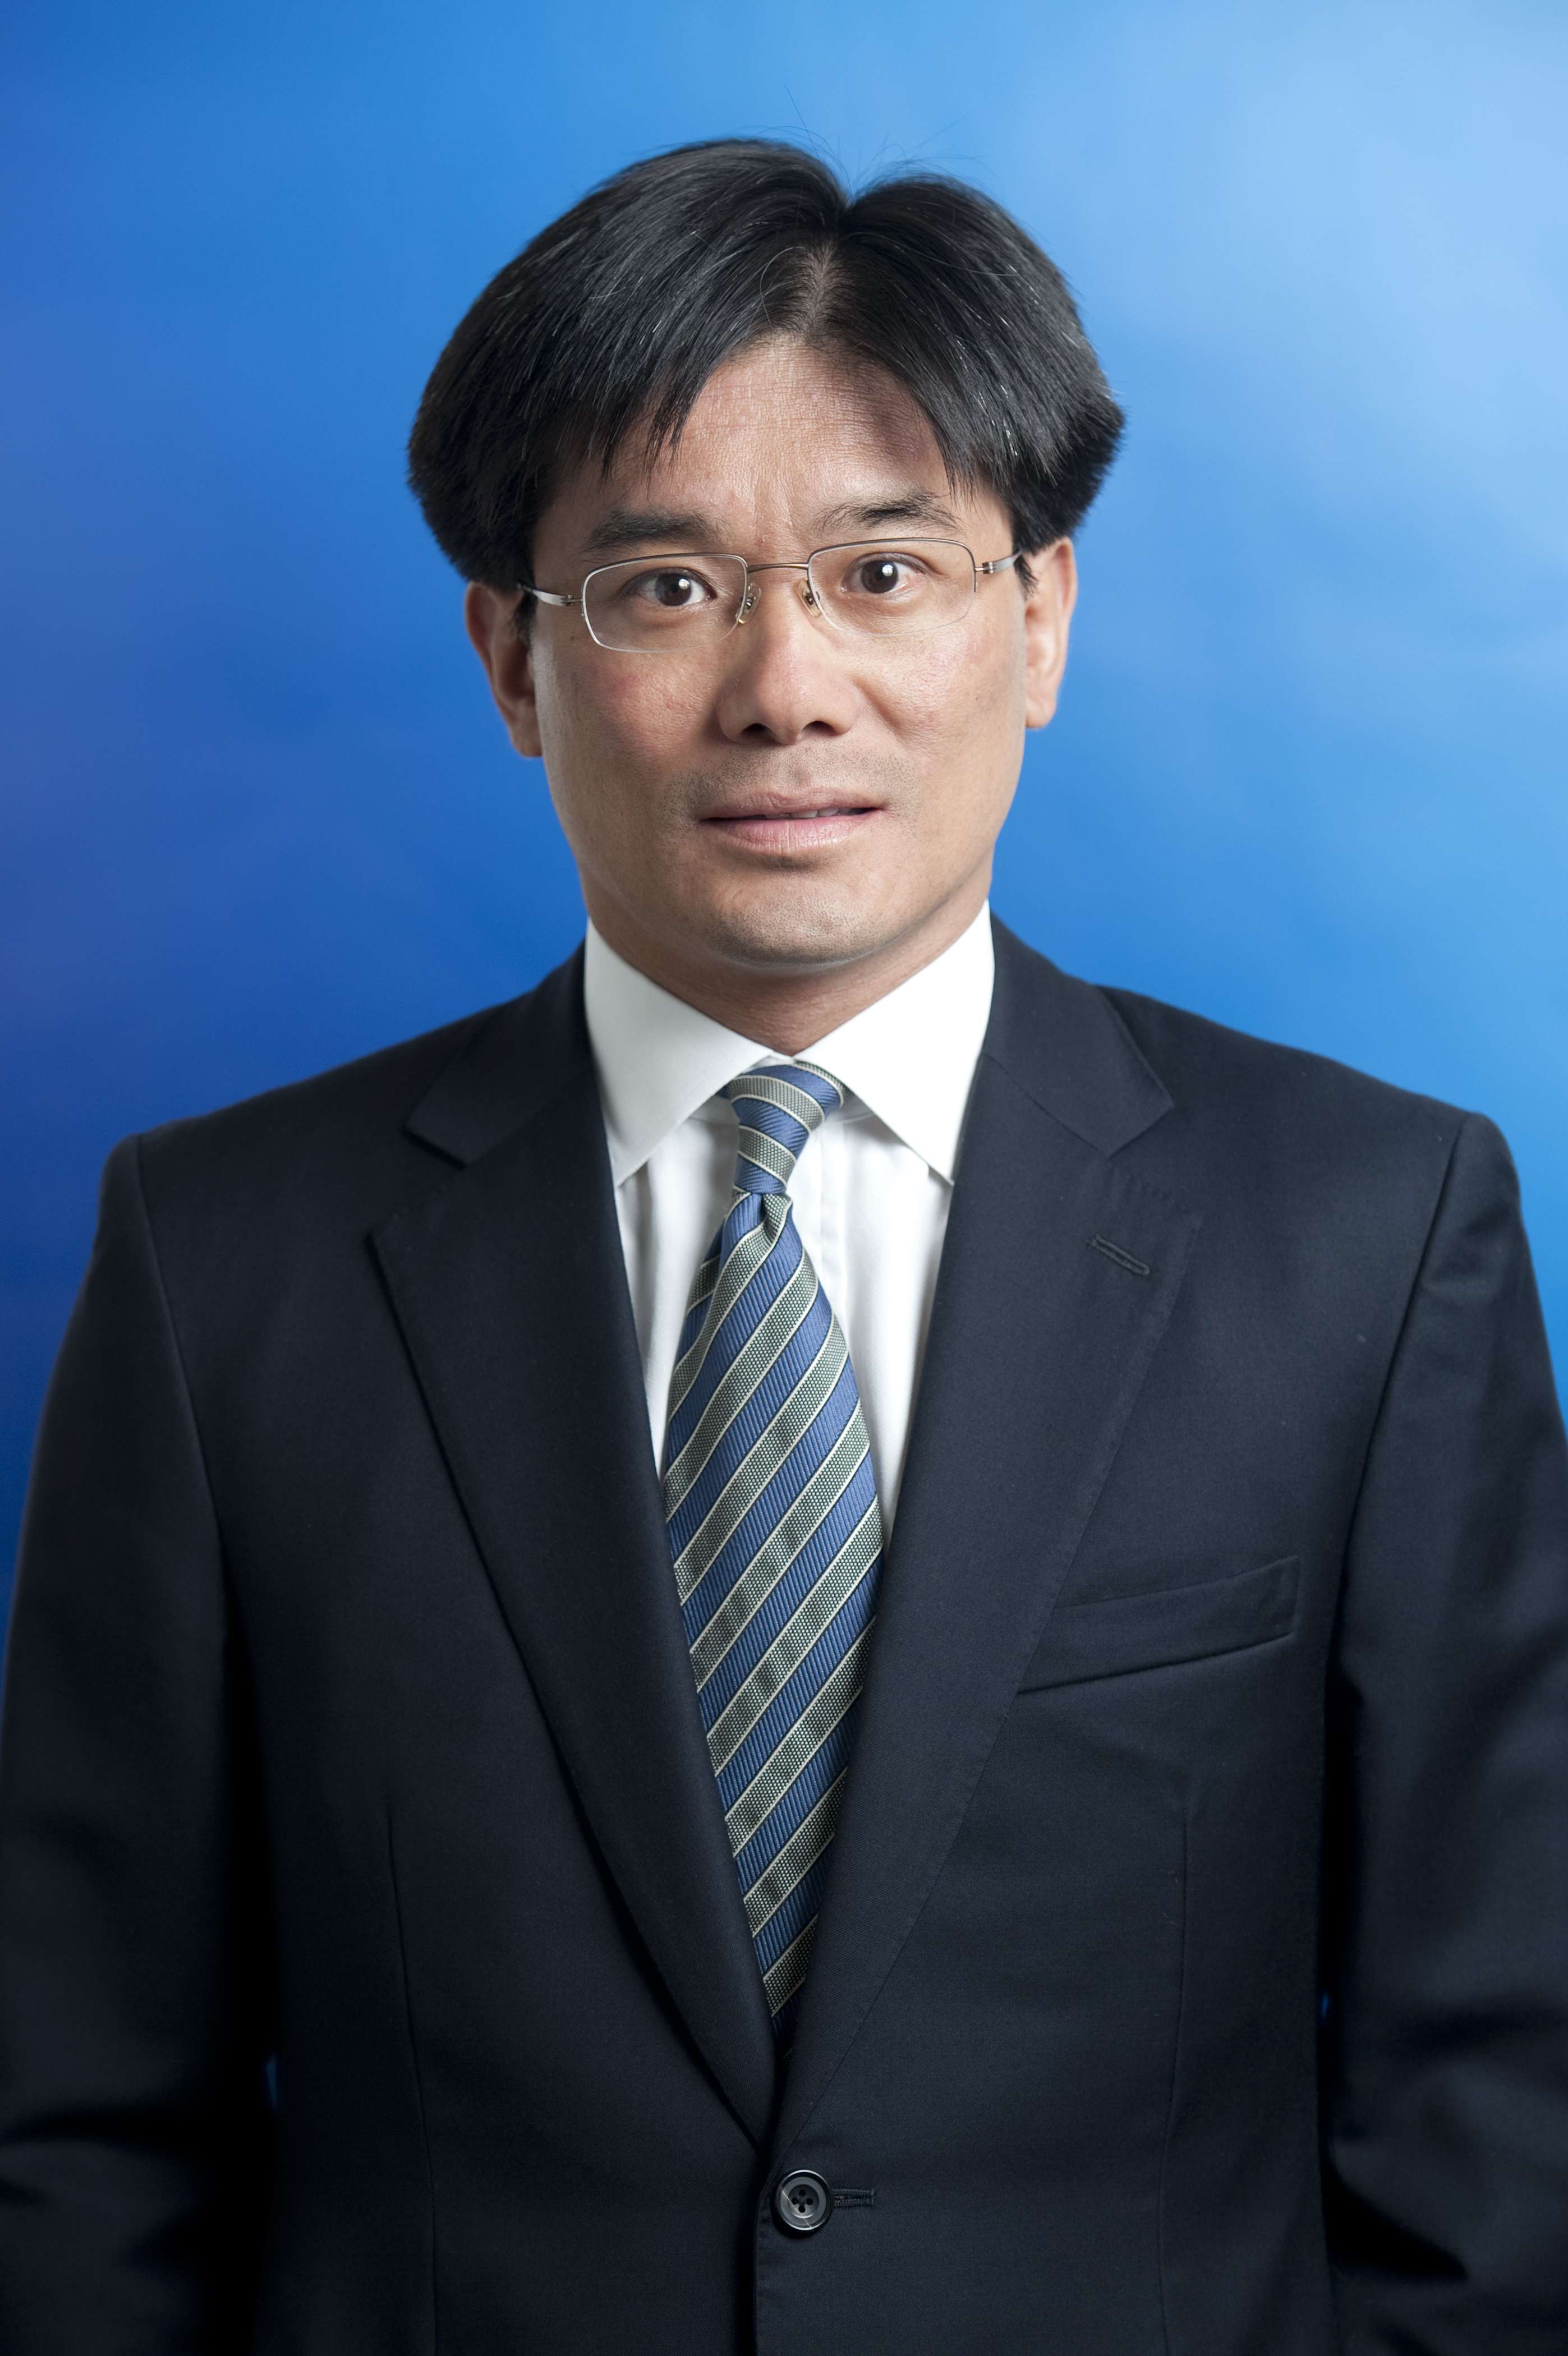 Bonn Liu, partner and head of investment management at KPMG China, believes cooperation between the HKEx and SGE will bring forth multiple benefits for the exchanges and investors.